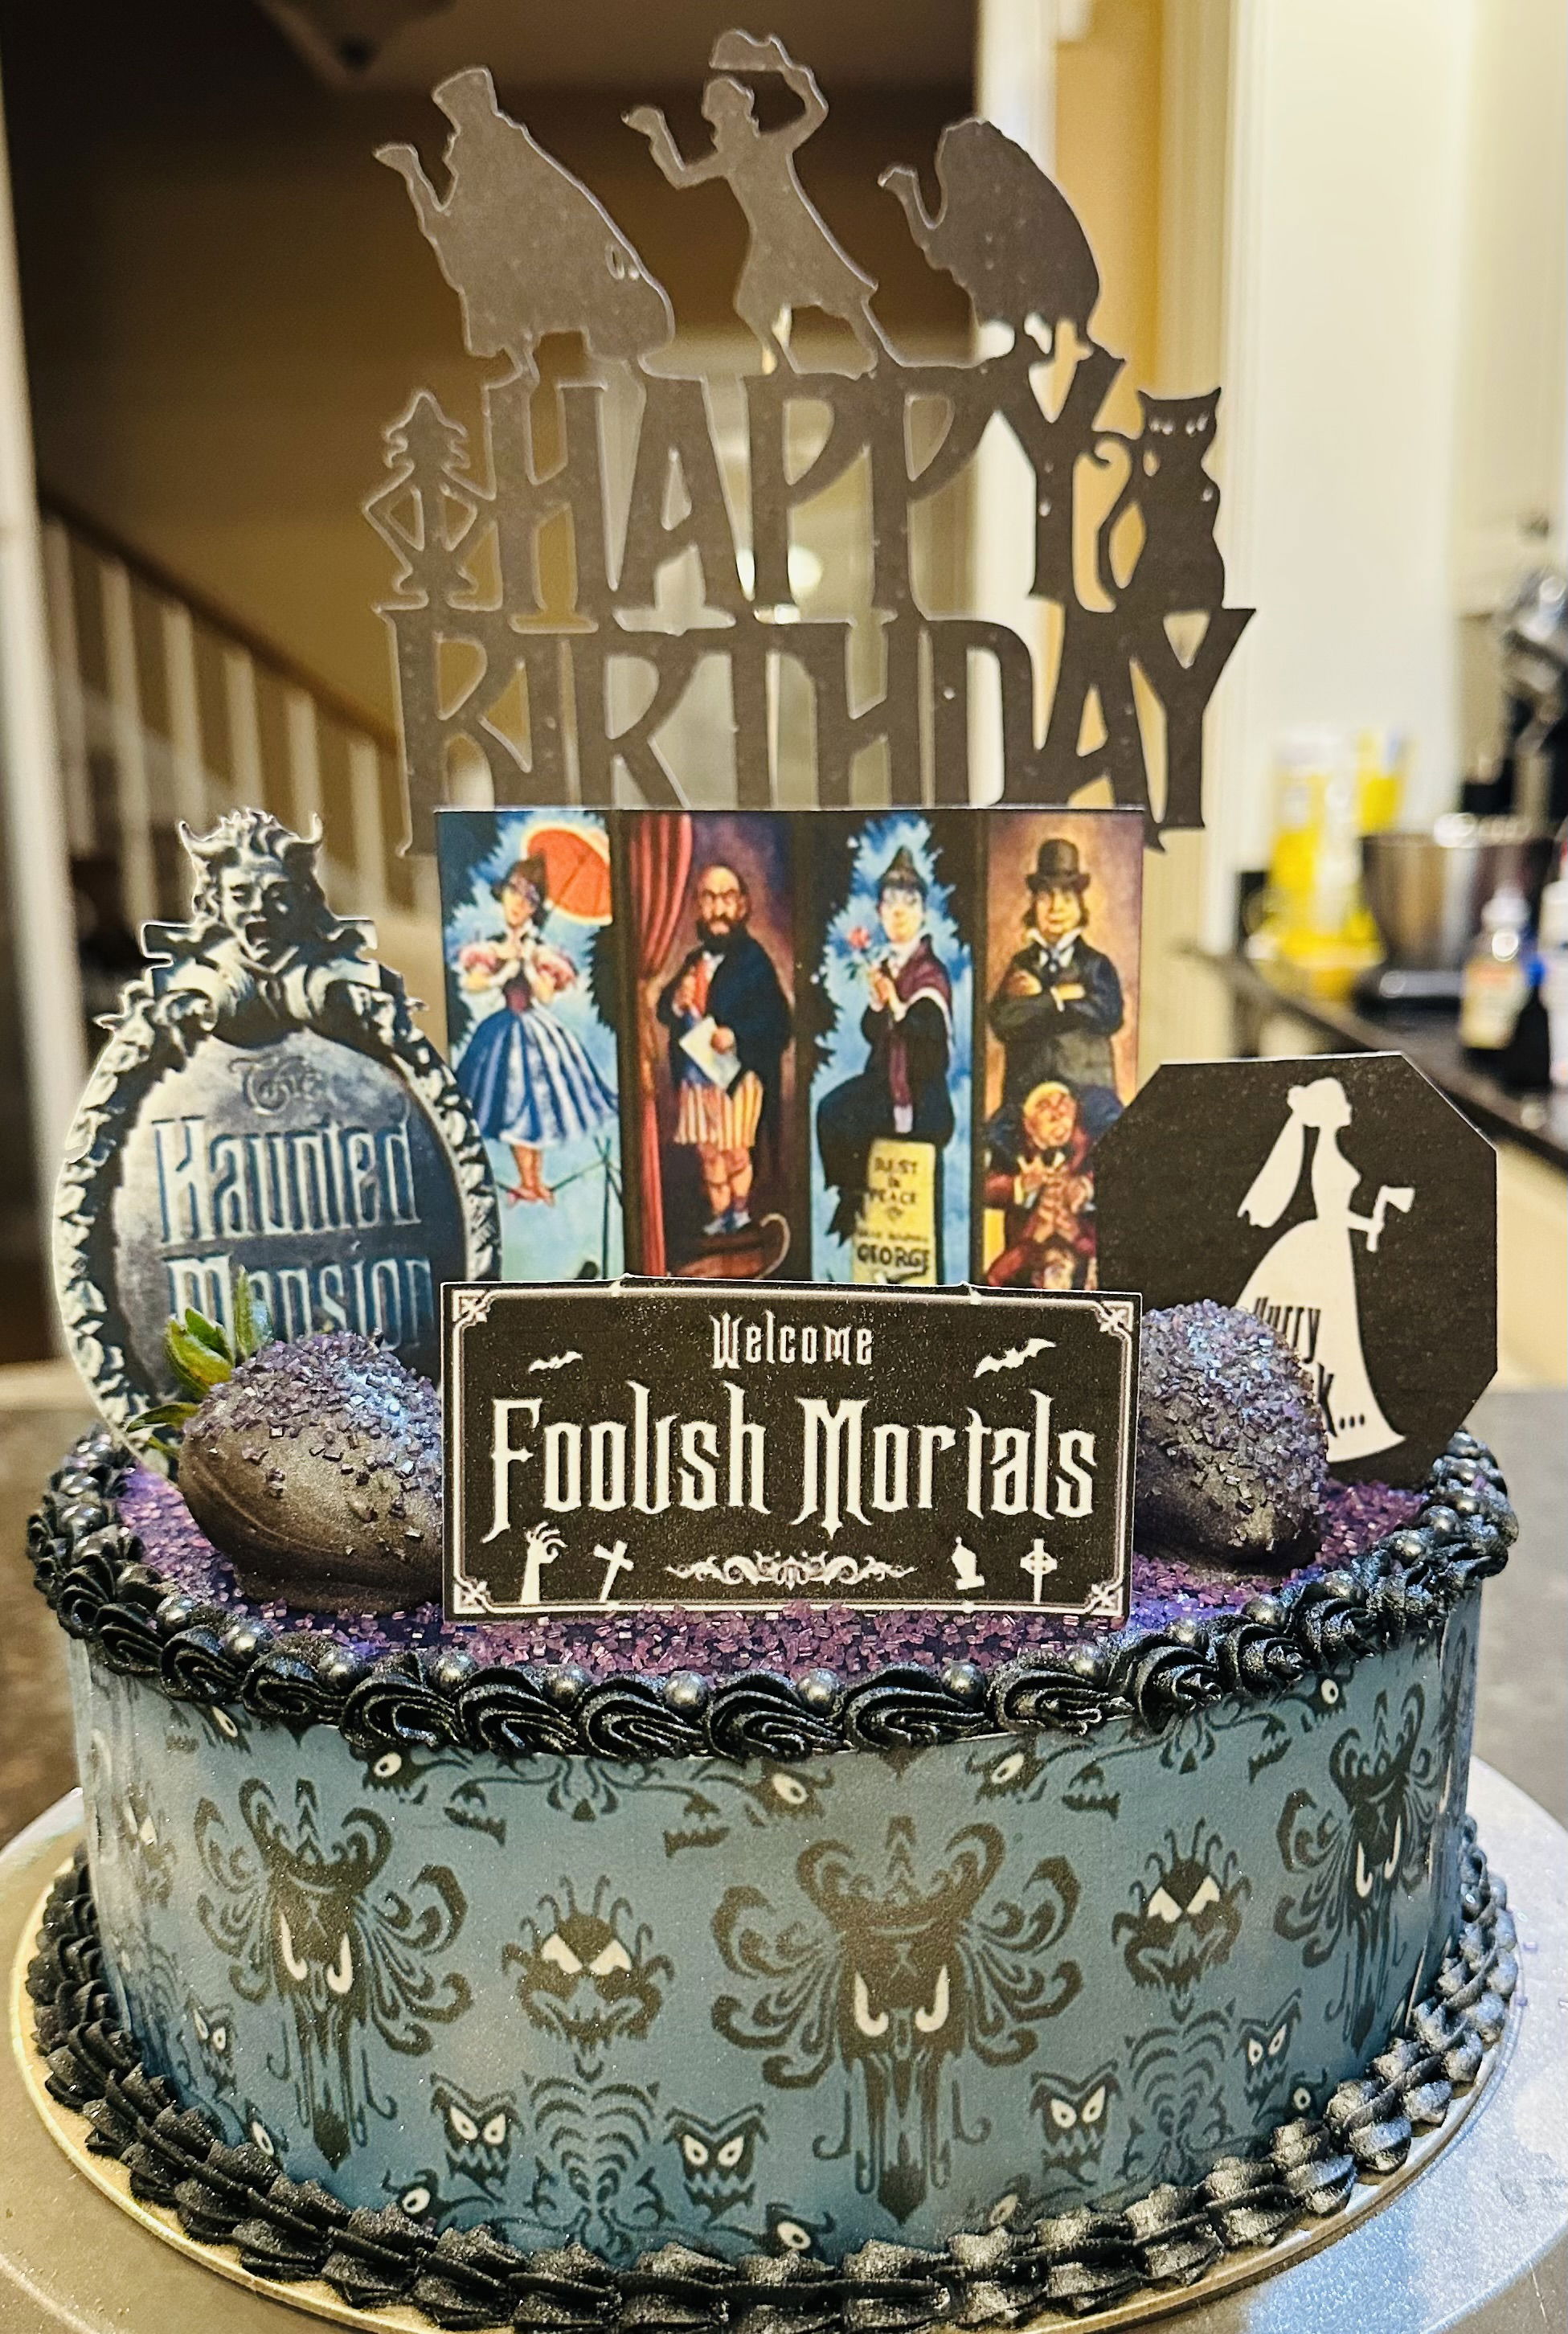 2 Layer Funfetti Disney Haunted Mansion Birthday Cake with Buttercream Frosting, Edible Images, and Chocolate Dipped Strawberries